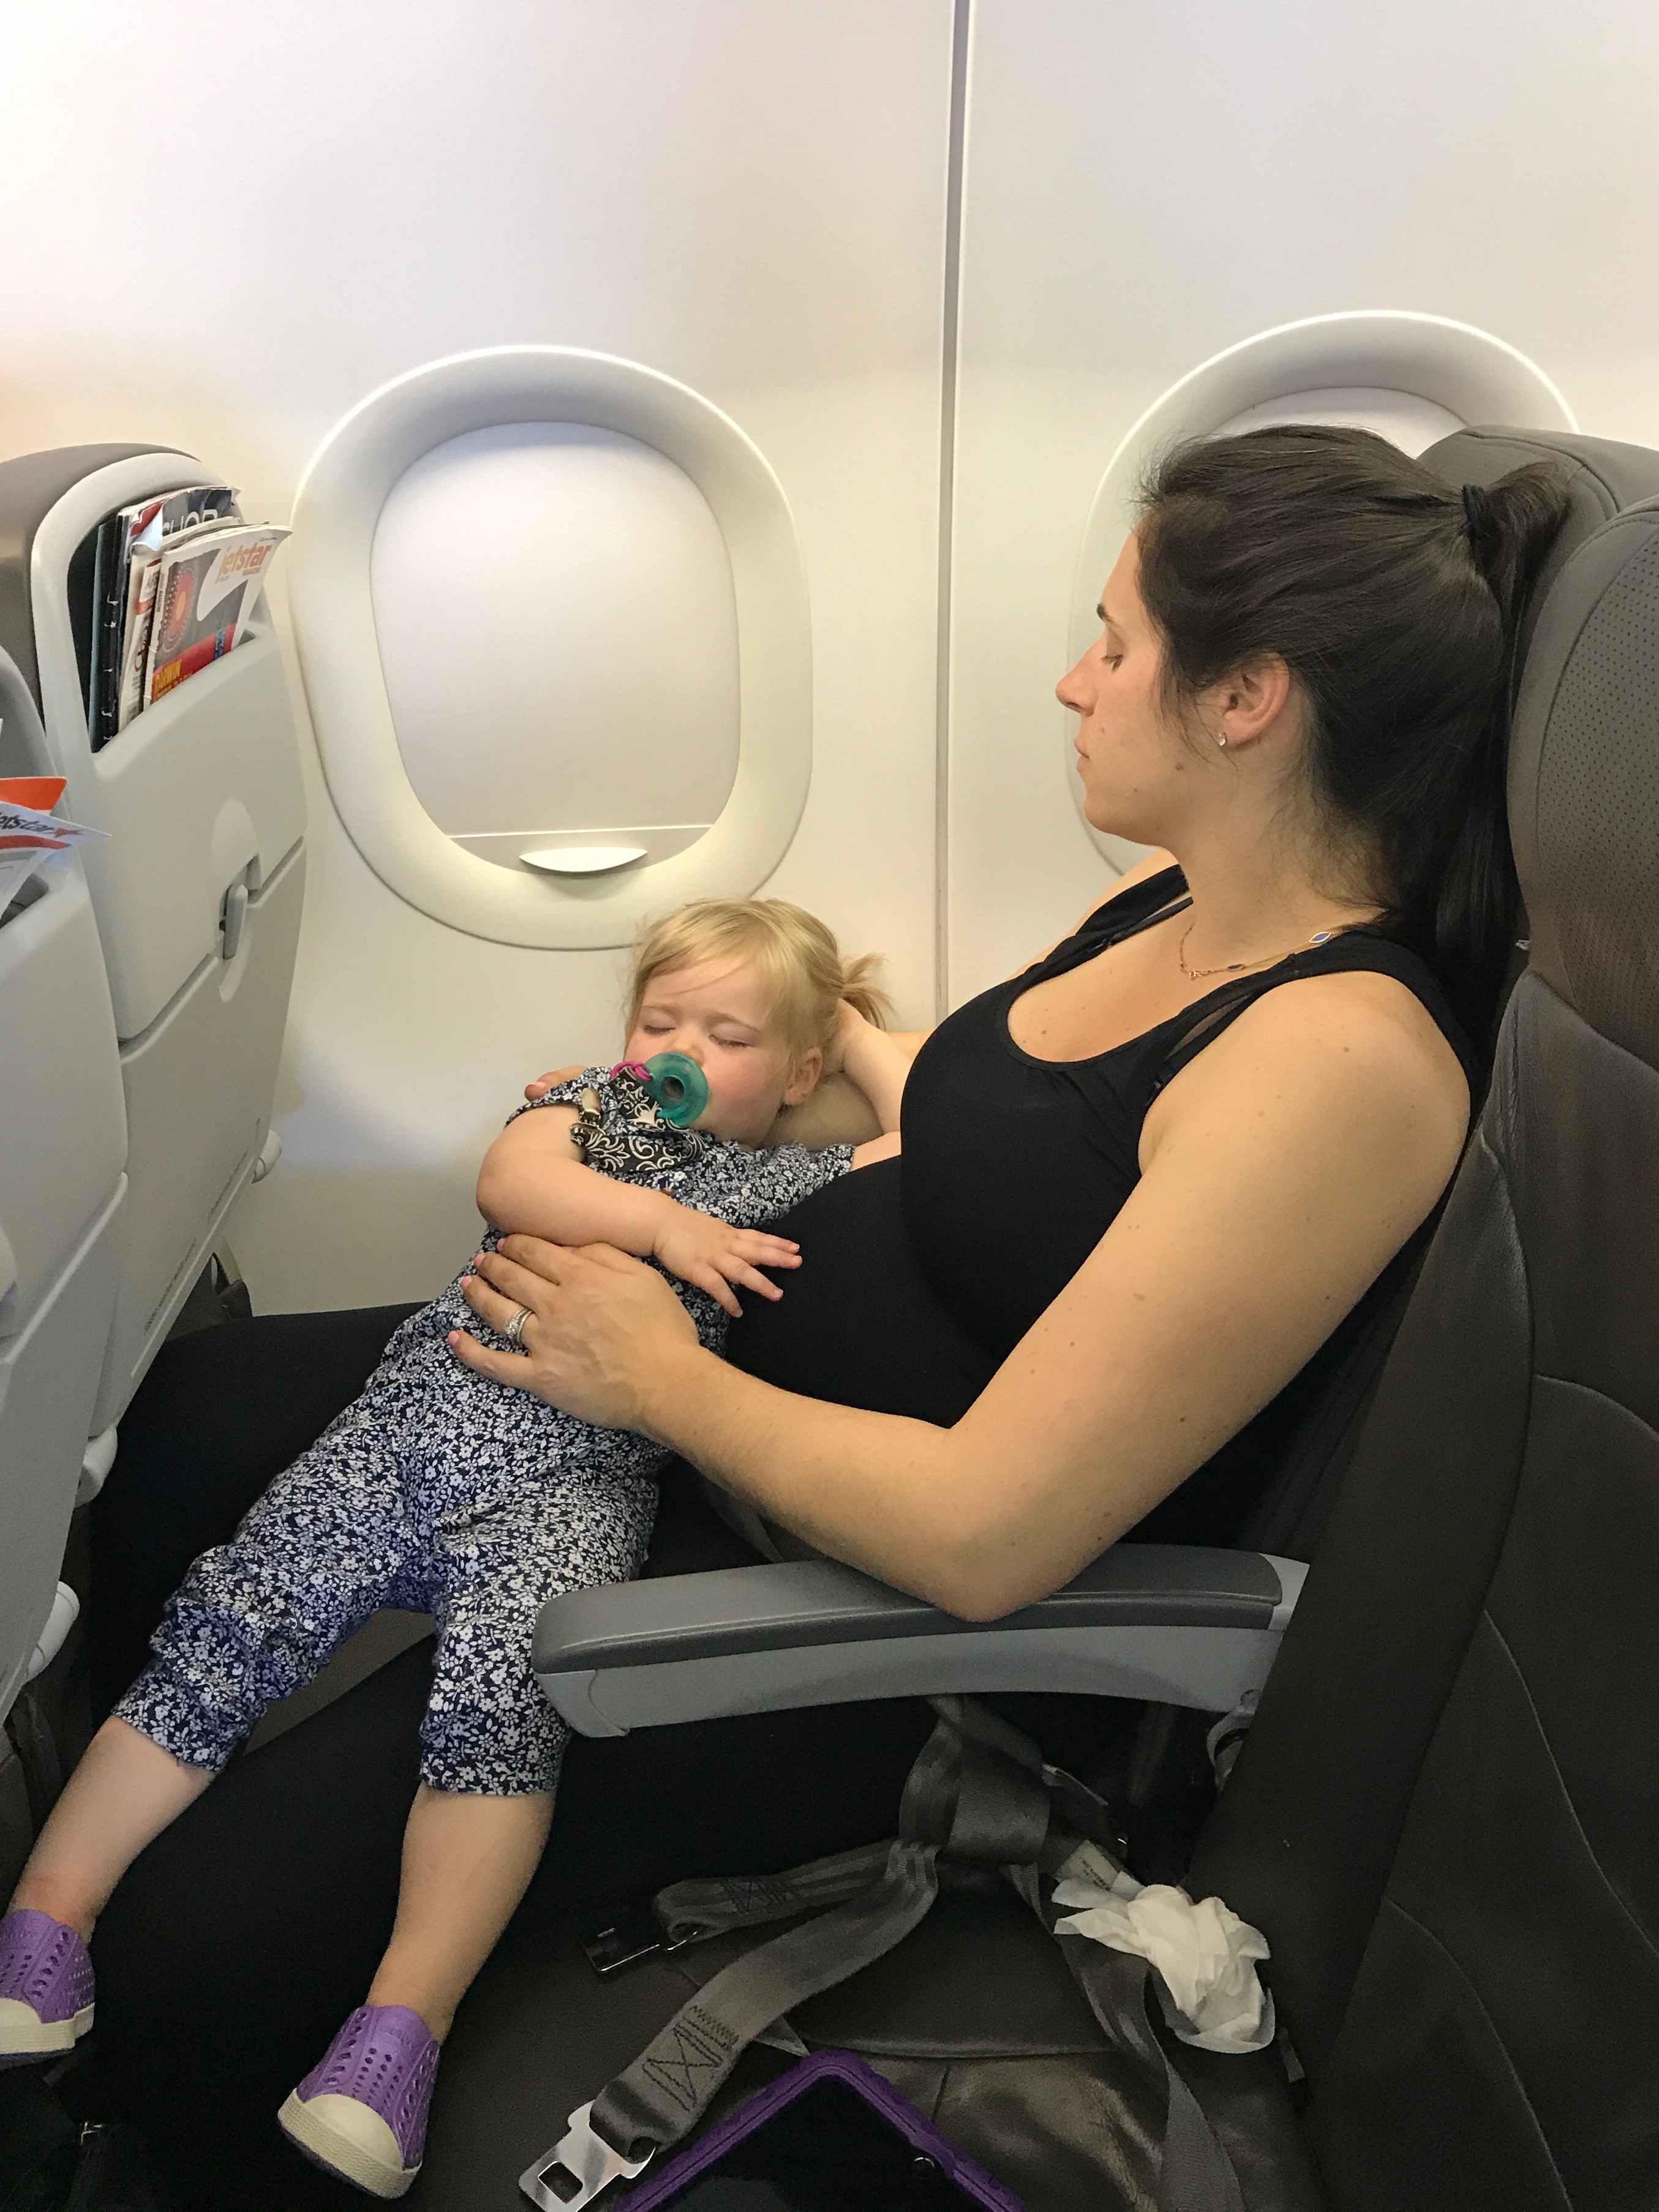 can i travel on plane when pregnant